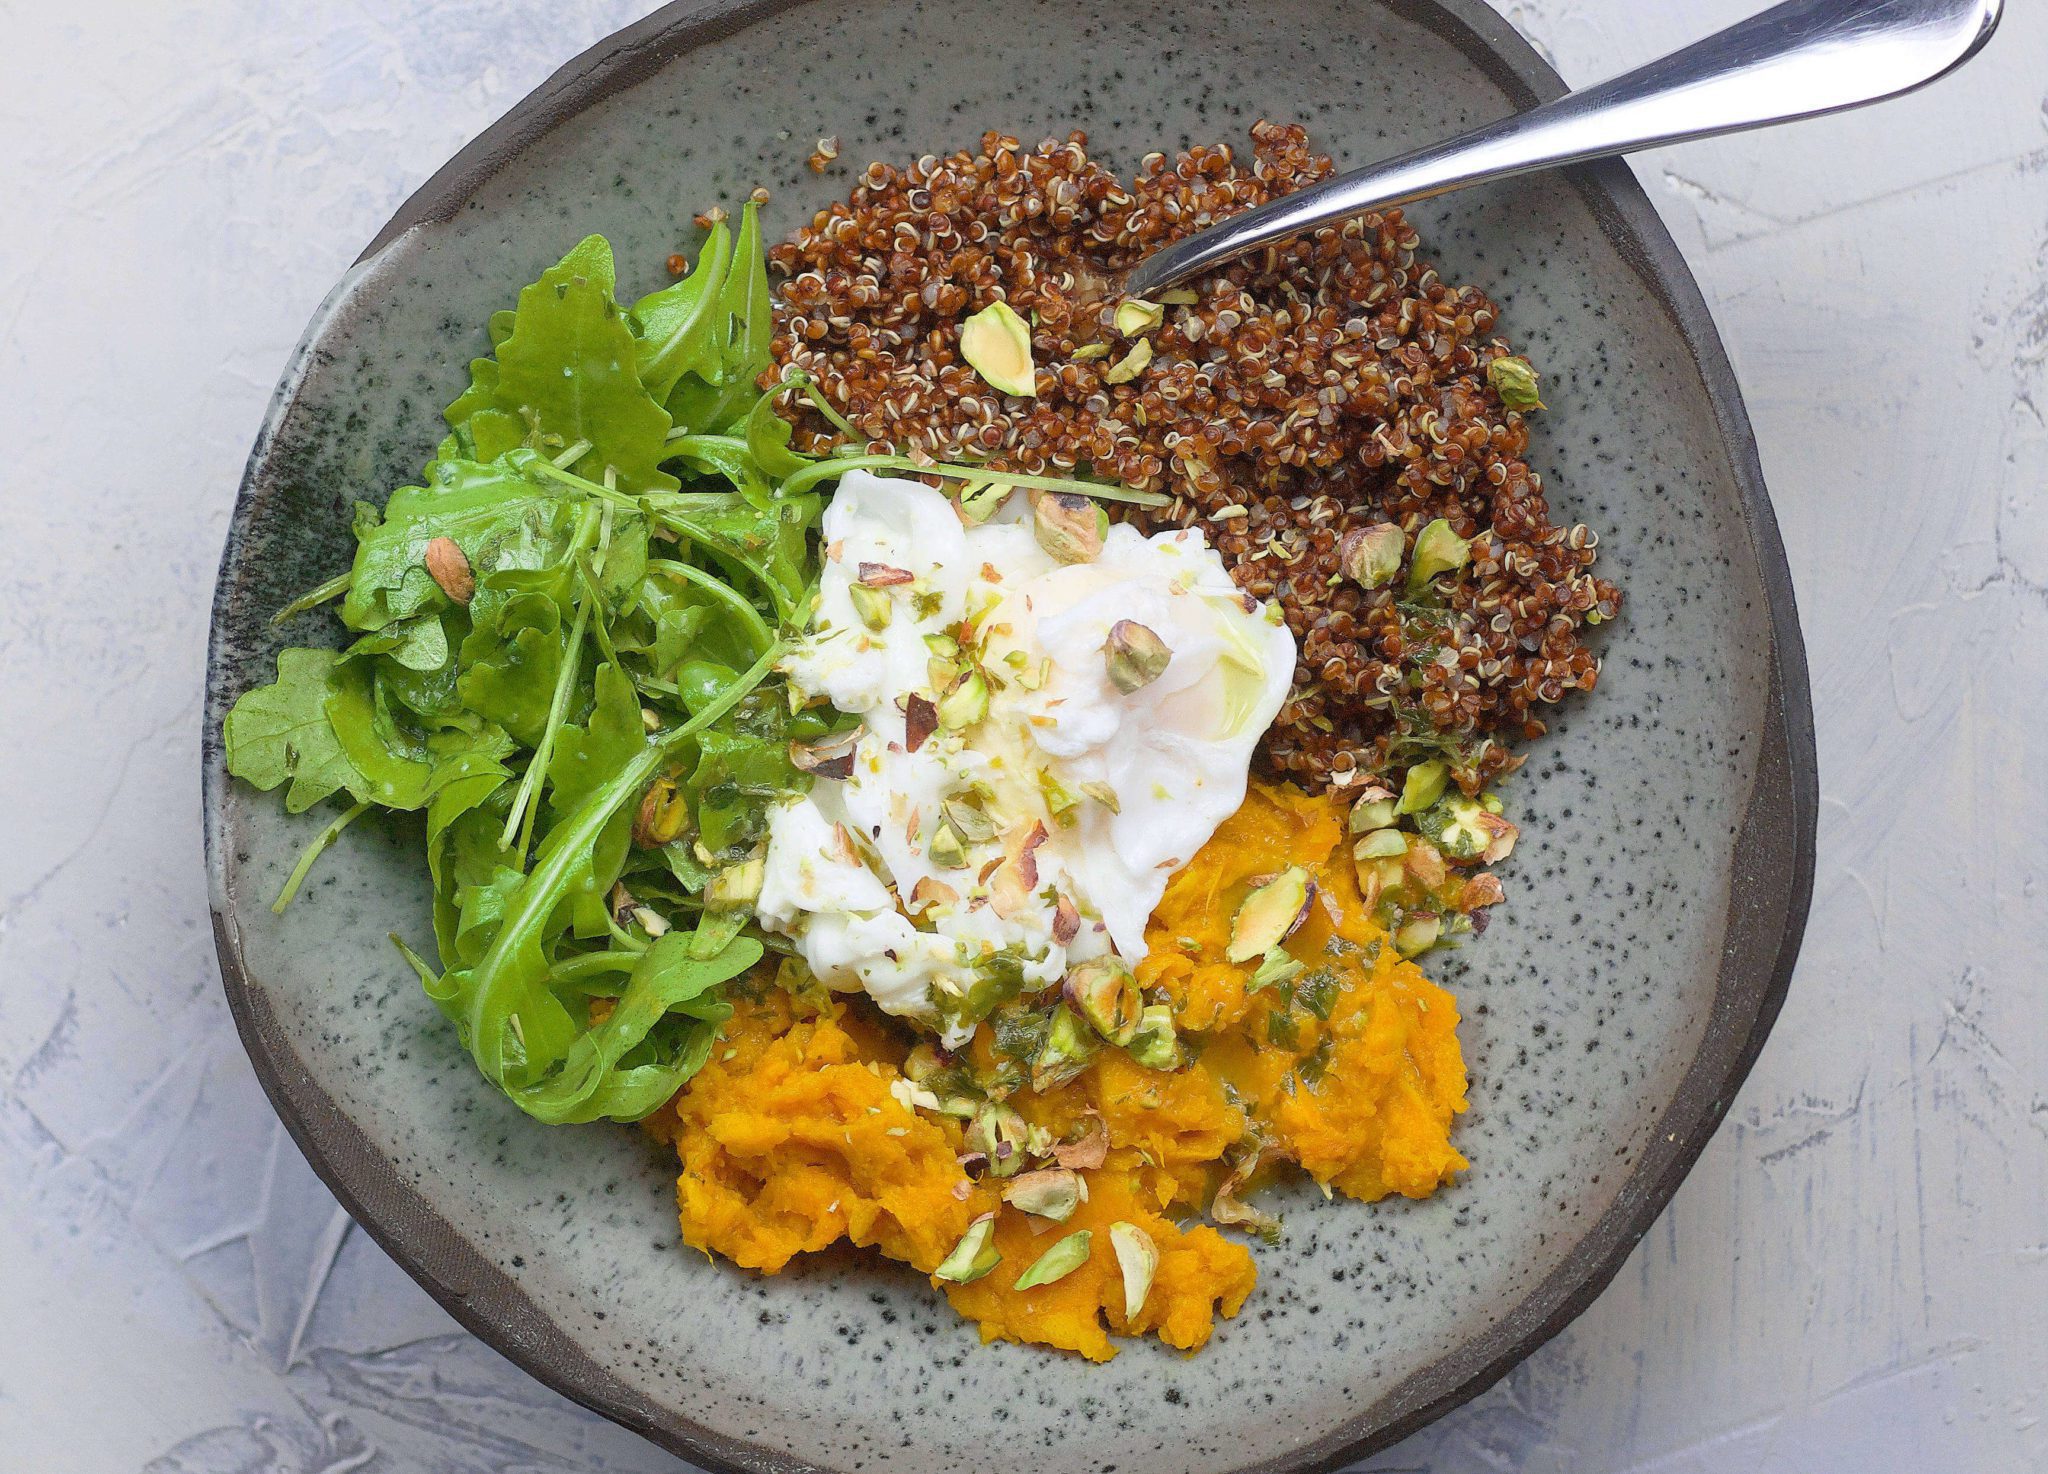 1 cup red quinoa 2 large sweet potatoes, cut into chunks 3 tbsp olive oil 1-2 teaspoons turmeric 3 cloves garlic 2 cups vegetable bullion 1/4 cup lemon juice 2 teaspoons agave syrup 1/4 cup parsley leaves salt freshly cracked black pepper 2 poached eggs handful fresh rucola crushed pistachios or other nuts for topping